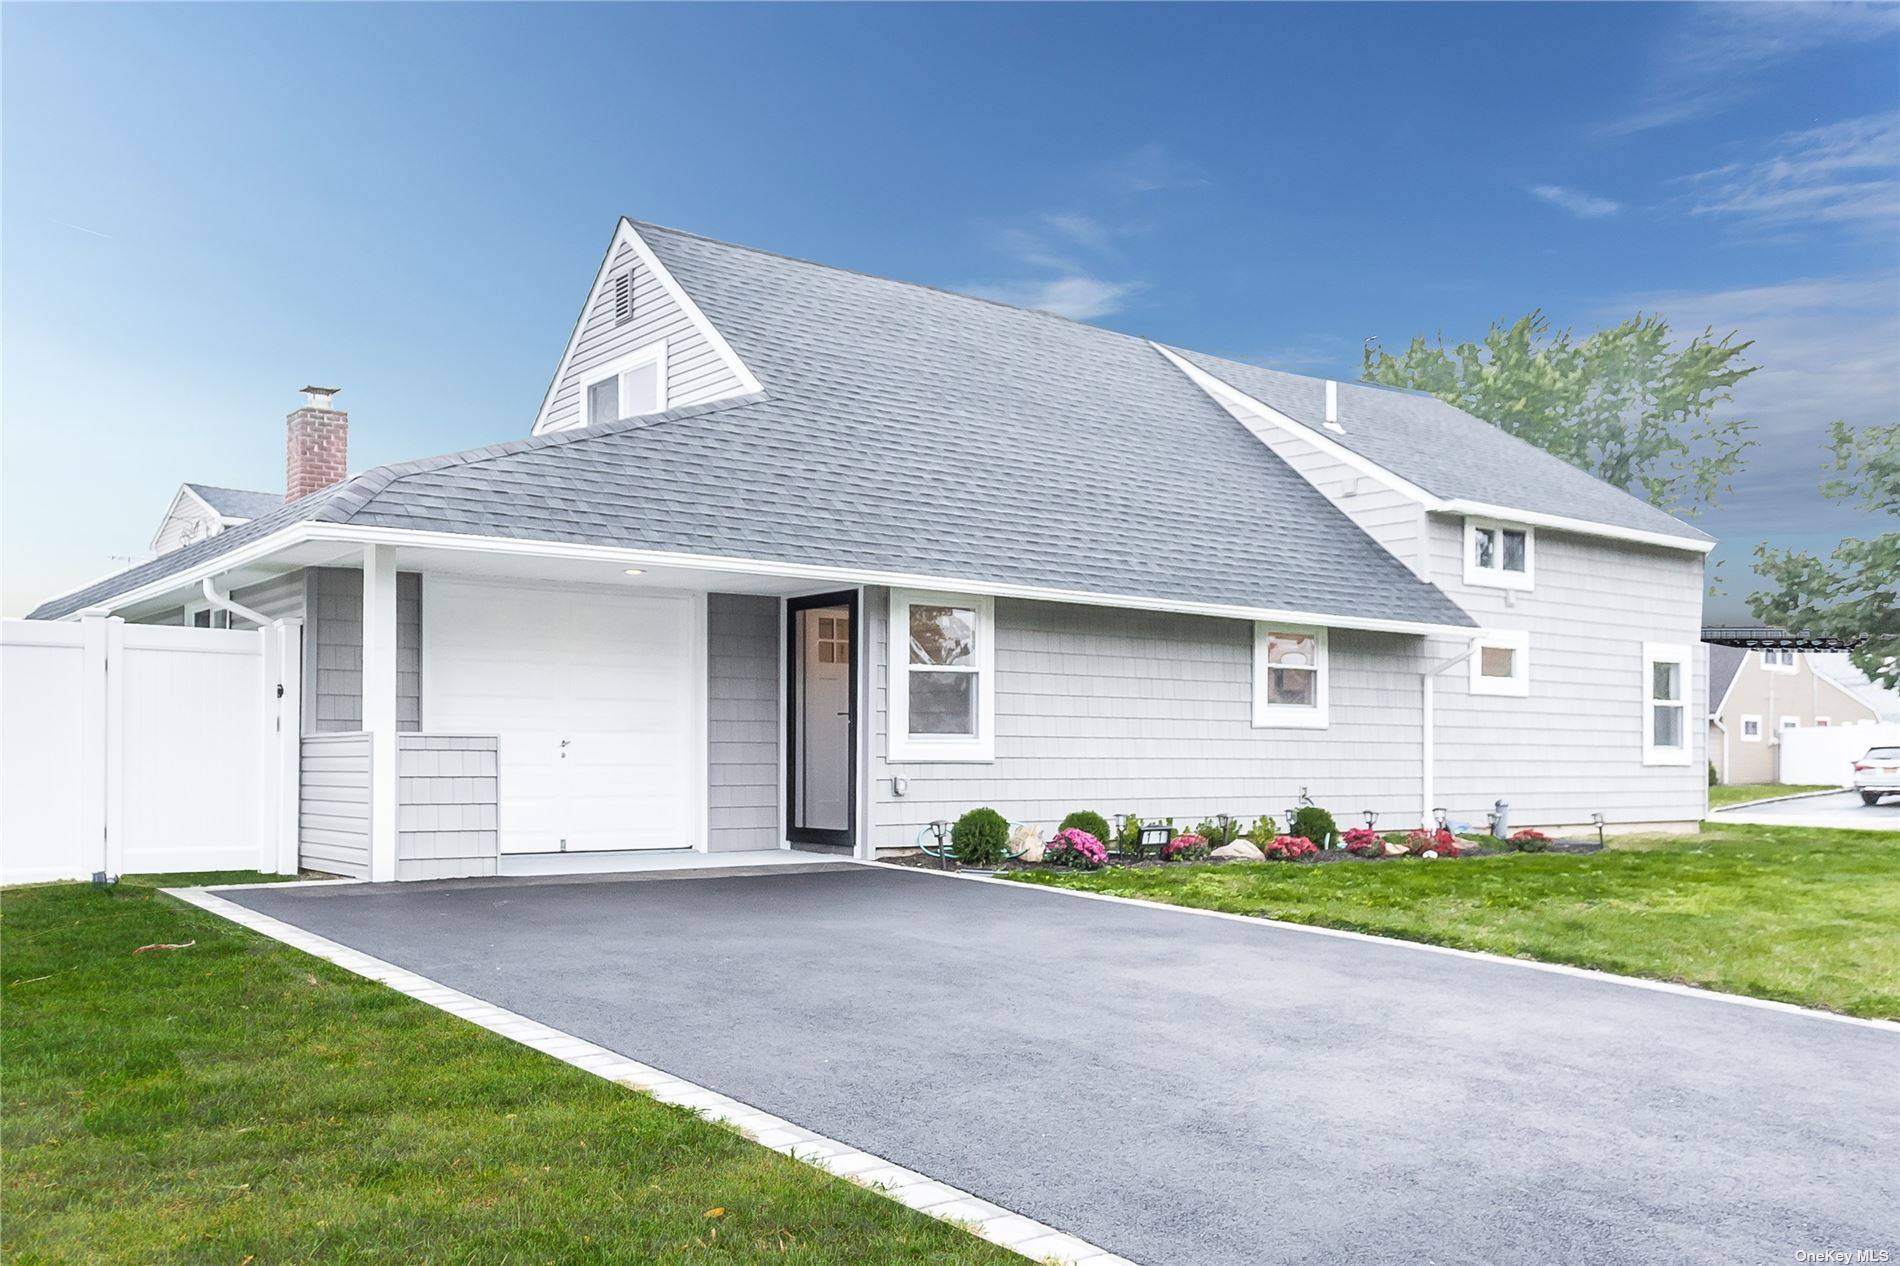 Diamond Expanded Ranch. All new including roof, siding, windows, doors, 2 zone central air, plumbing, boiler, baths, blacktop driveway with paver border, xl paver patio.